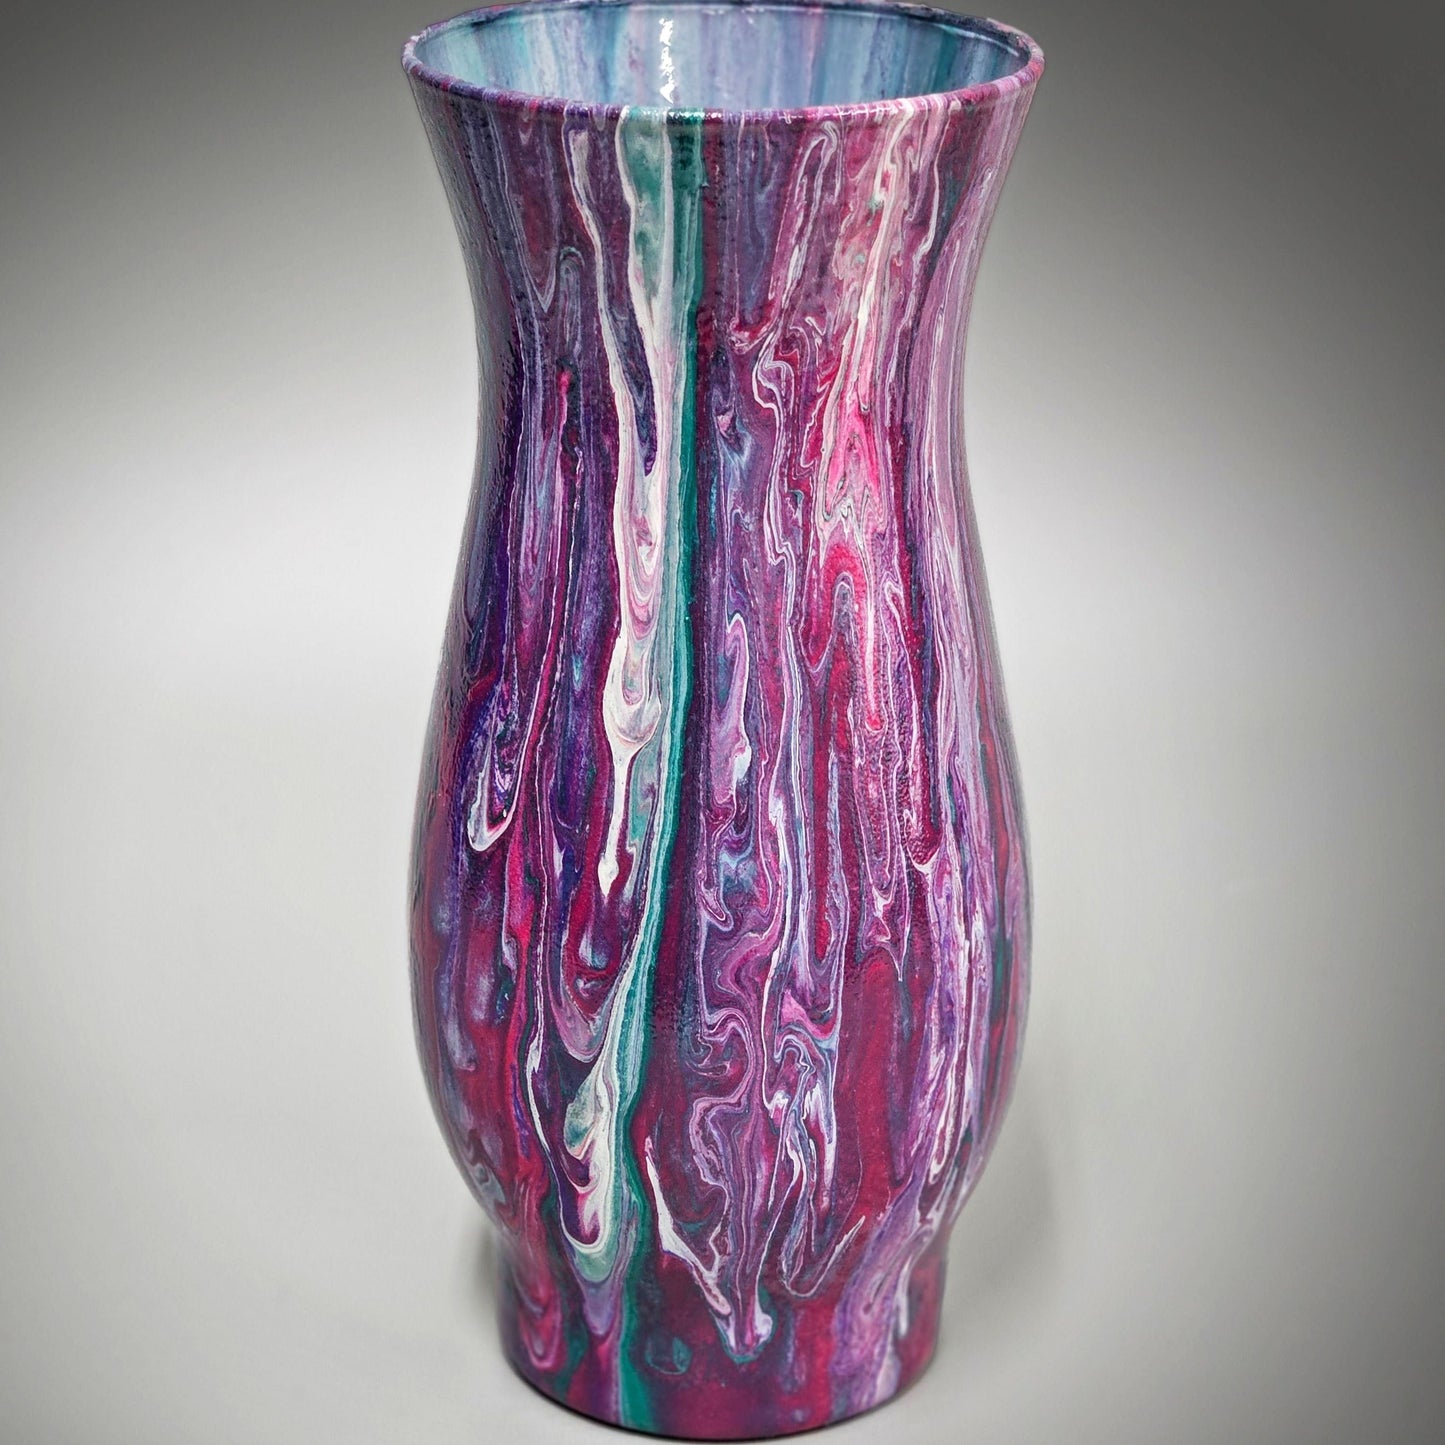 Glass Art Painted Vase in Fuchsia Teal